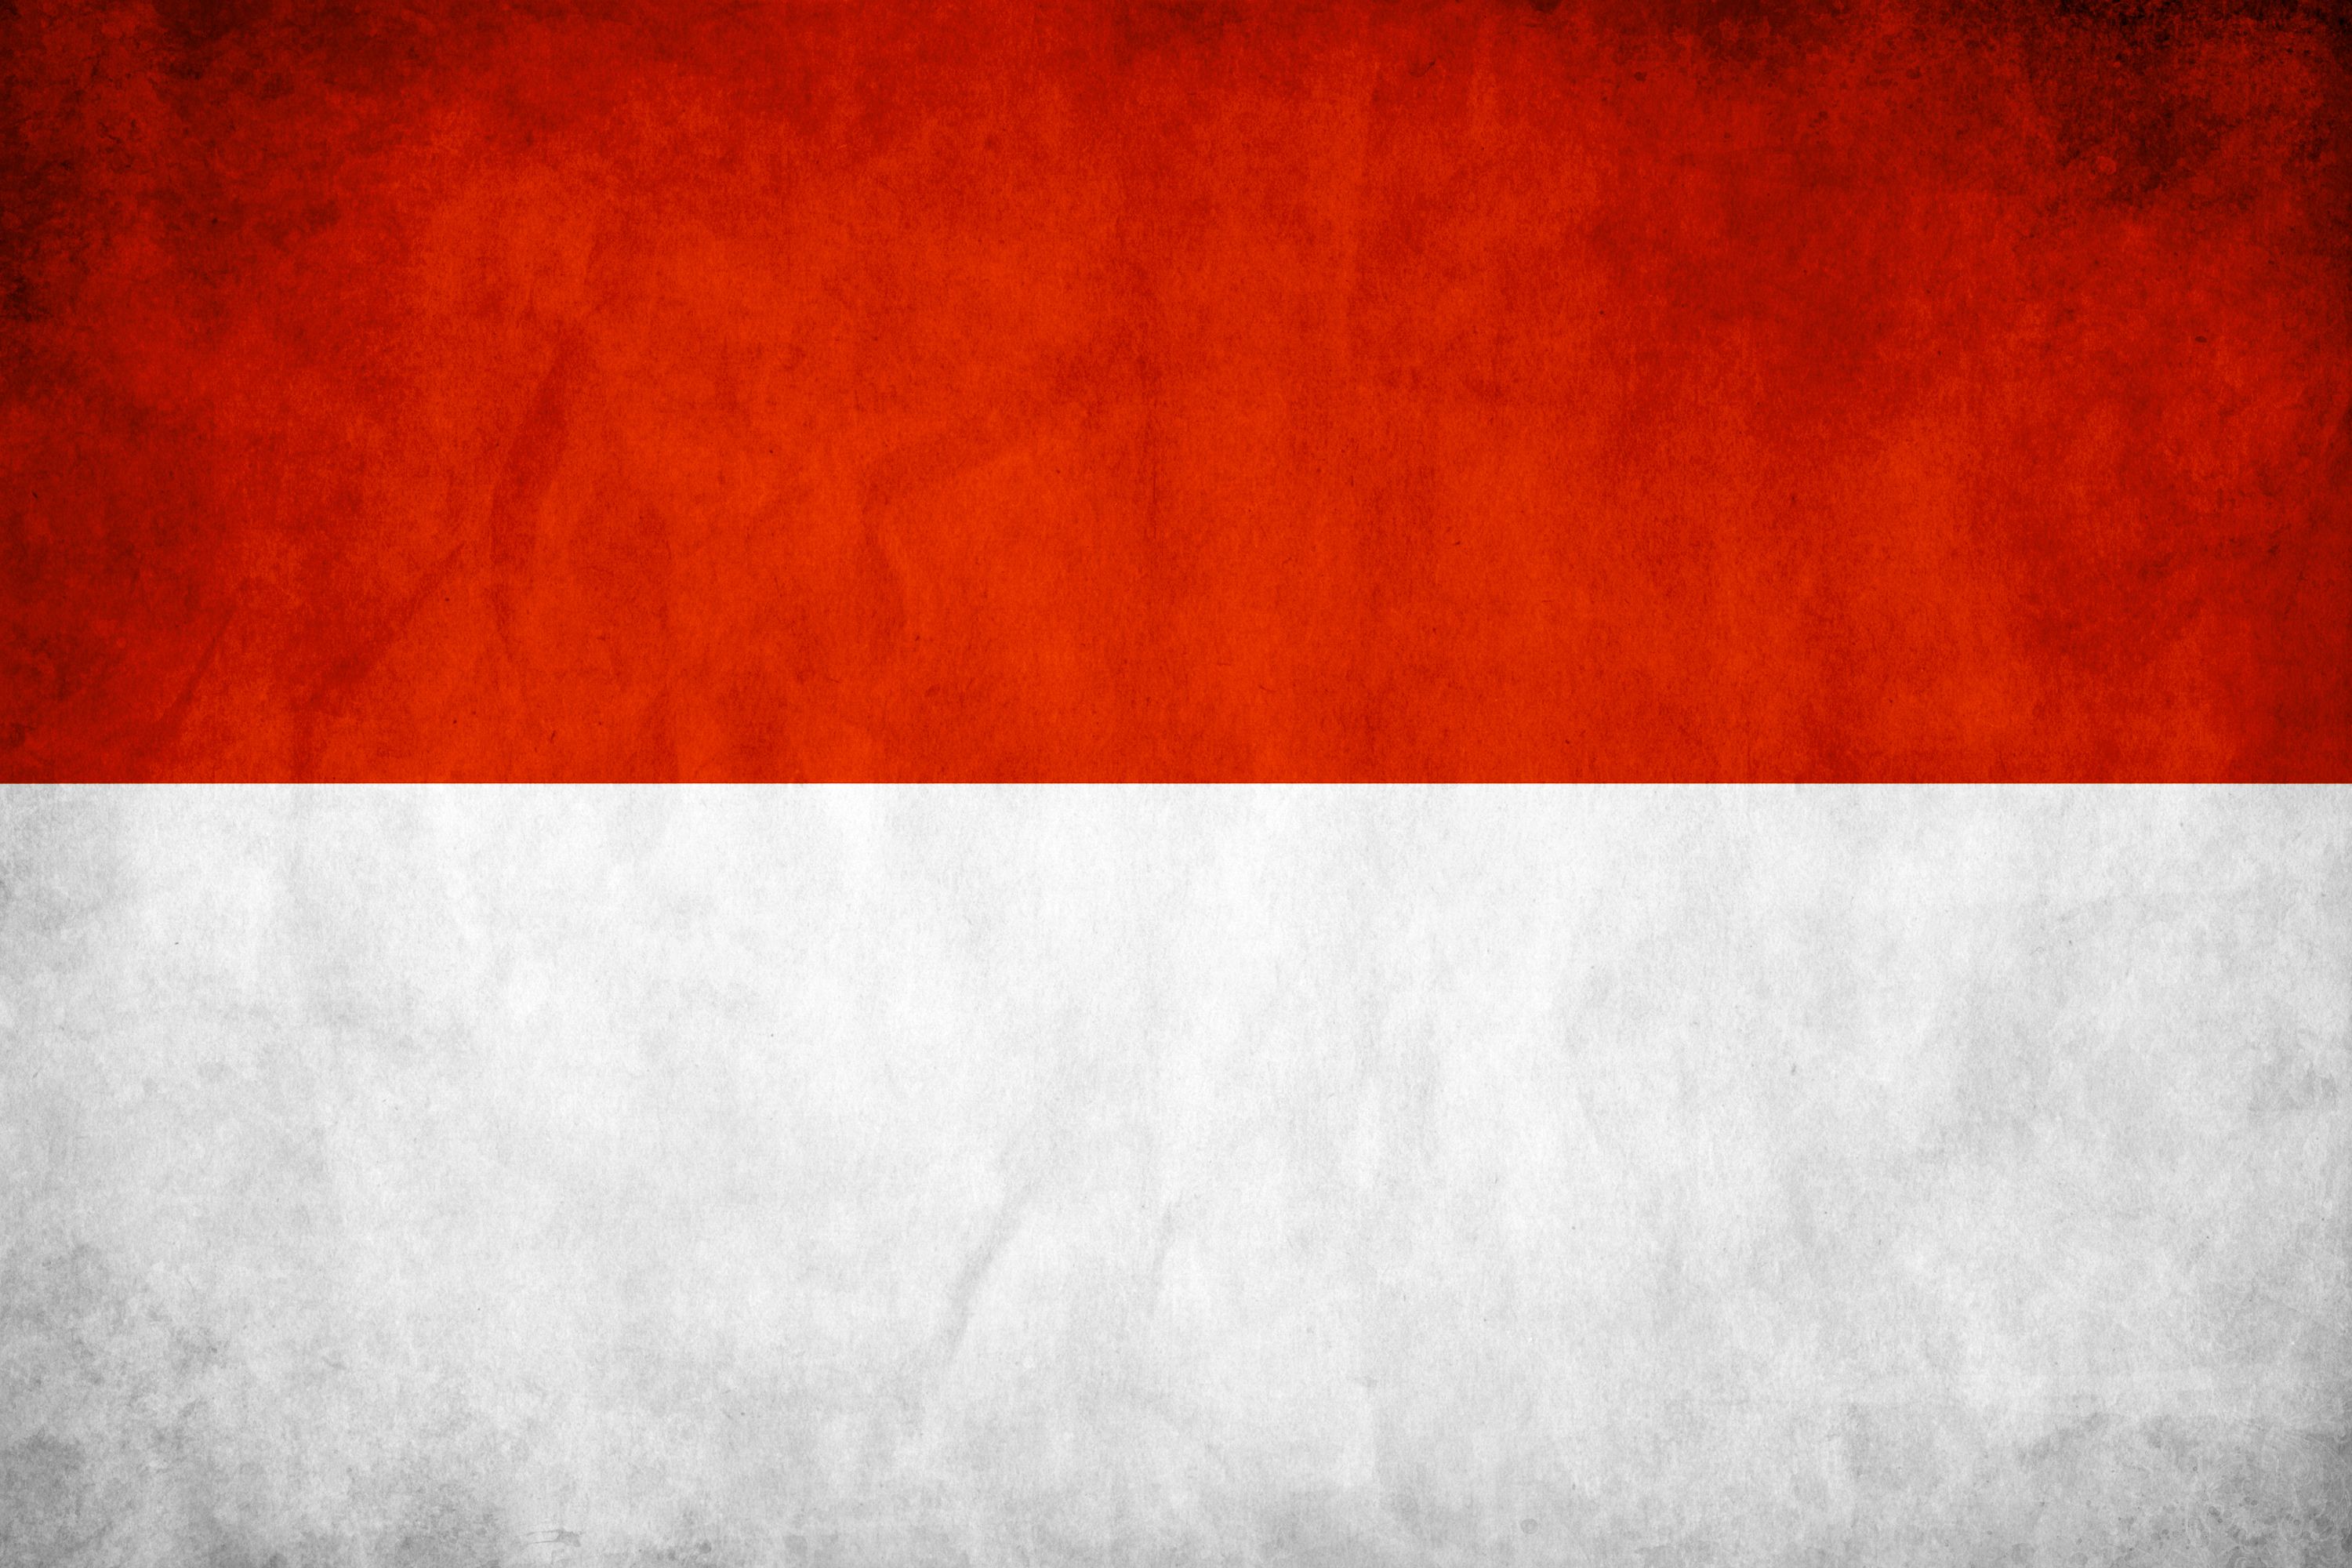 Indonesian Flag Wallpapers